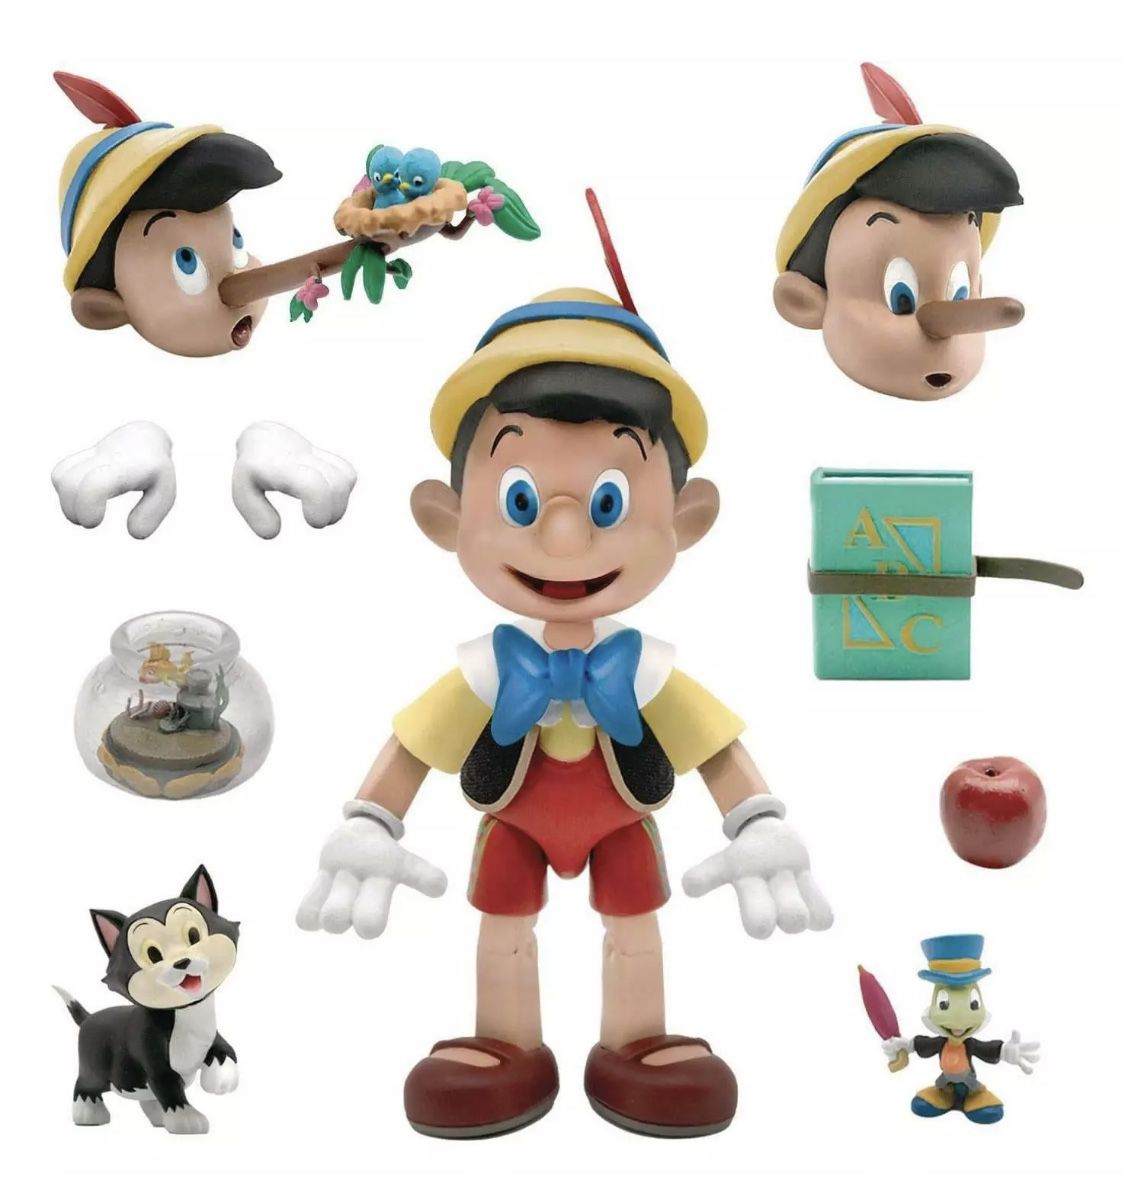 In Hand, Brand New, Never Opened Super7 Disney Ultimates Pinocchio Action Figure